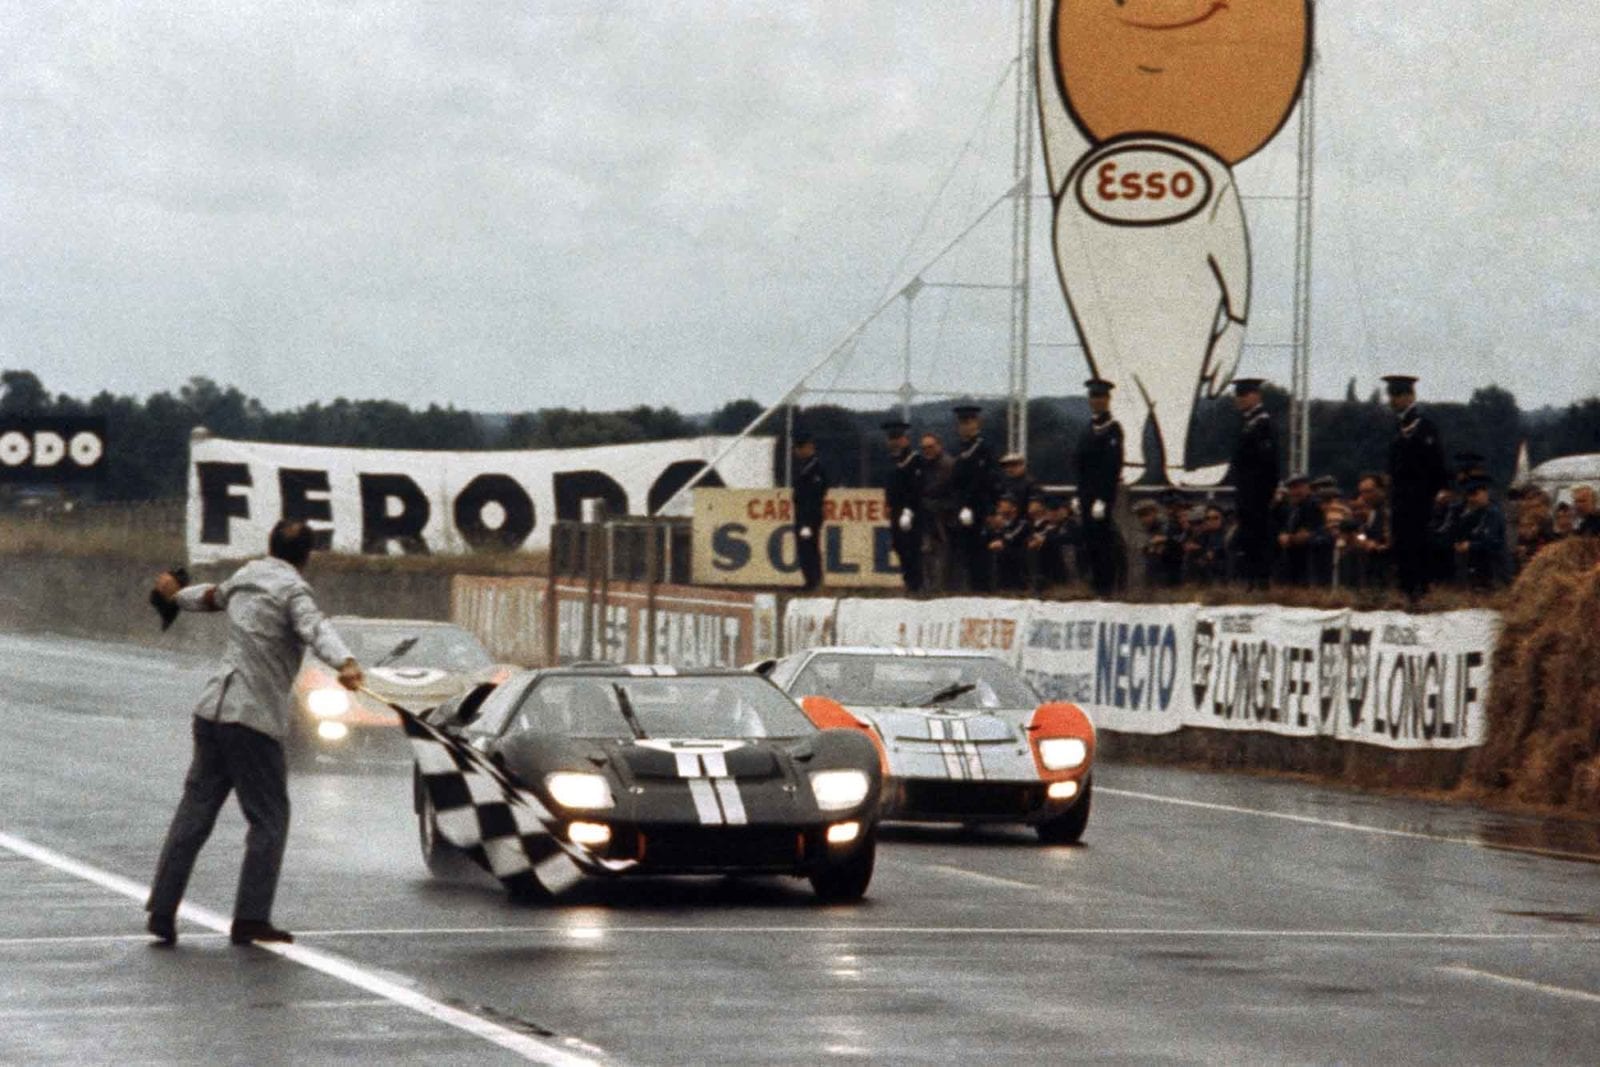 American Shelby team Ford GT40s take a one-two finish at Le Mans 1966, cars driven by Chris Amon/Bruce McLaren and Ken Miles/Denny Hulme